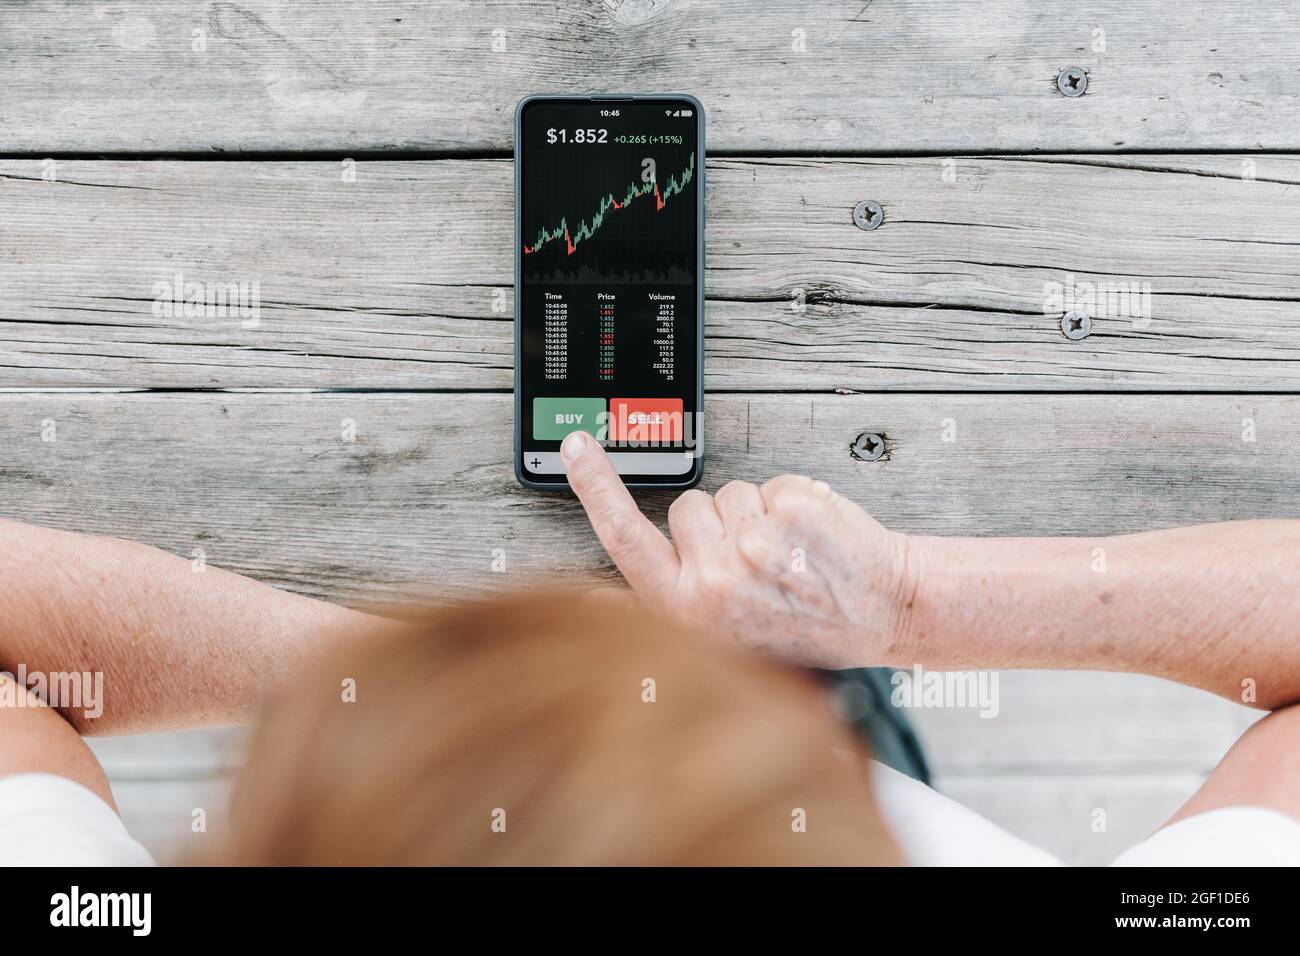 Investor woman using investment mobile phone app to buy crypto currencies Stock Photo